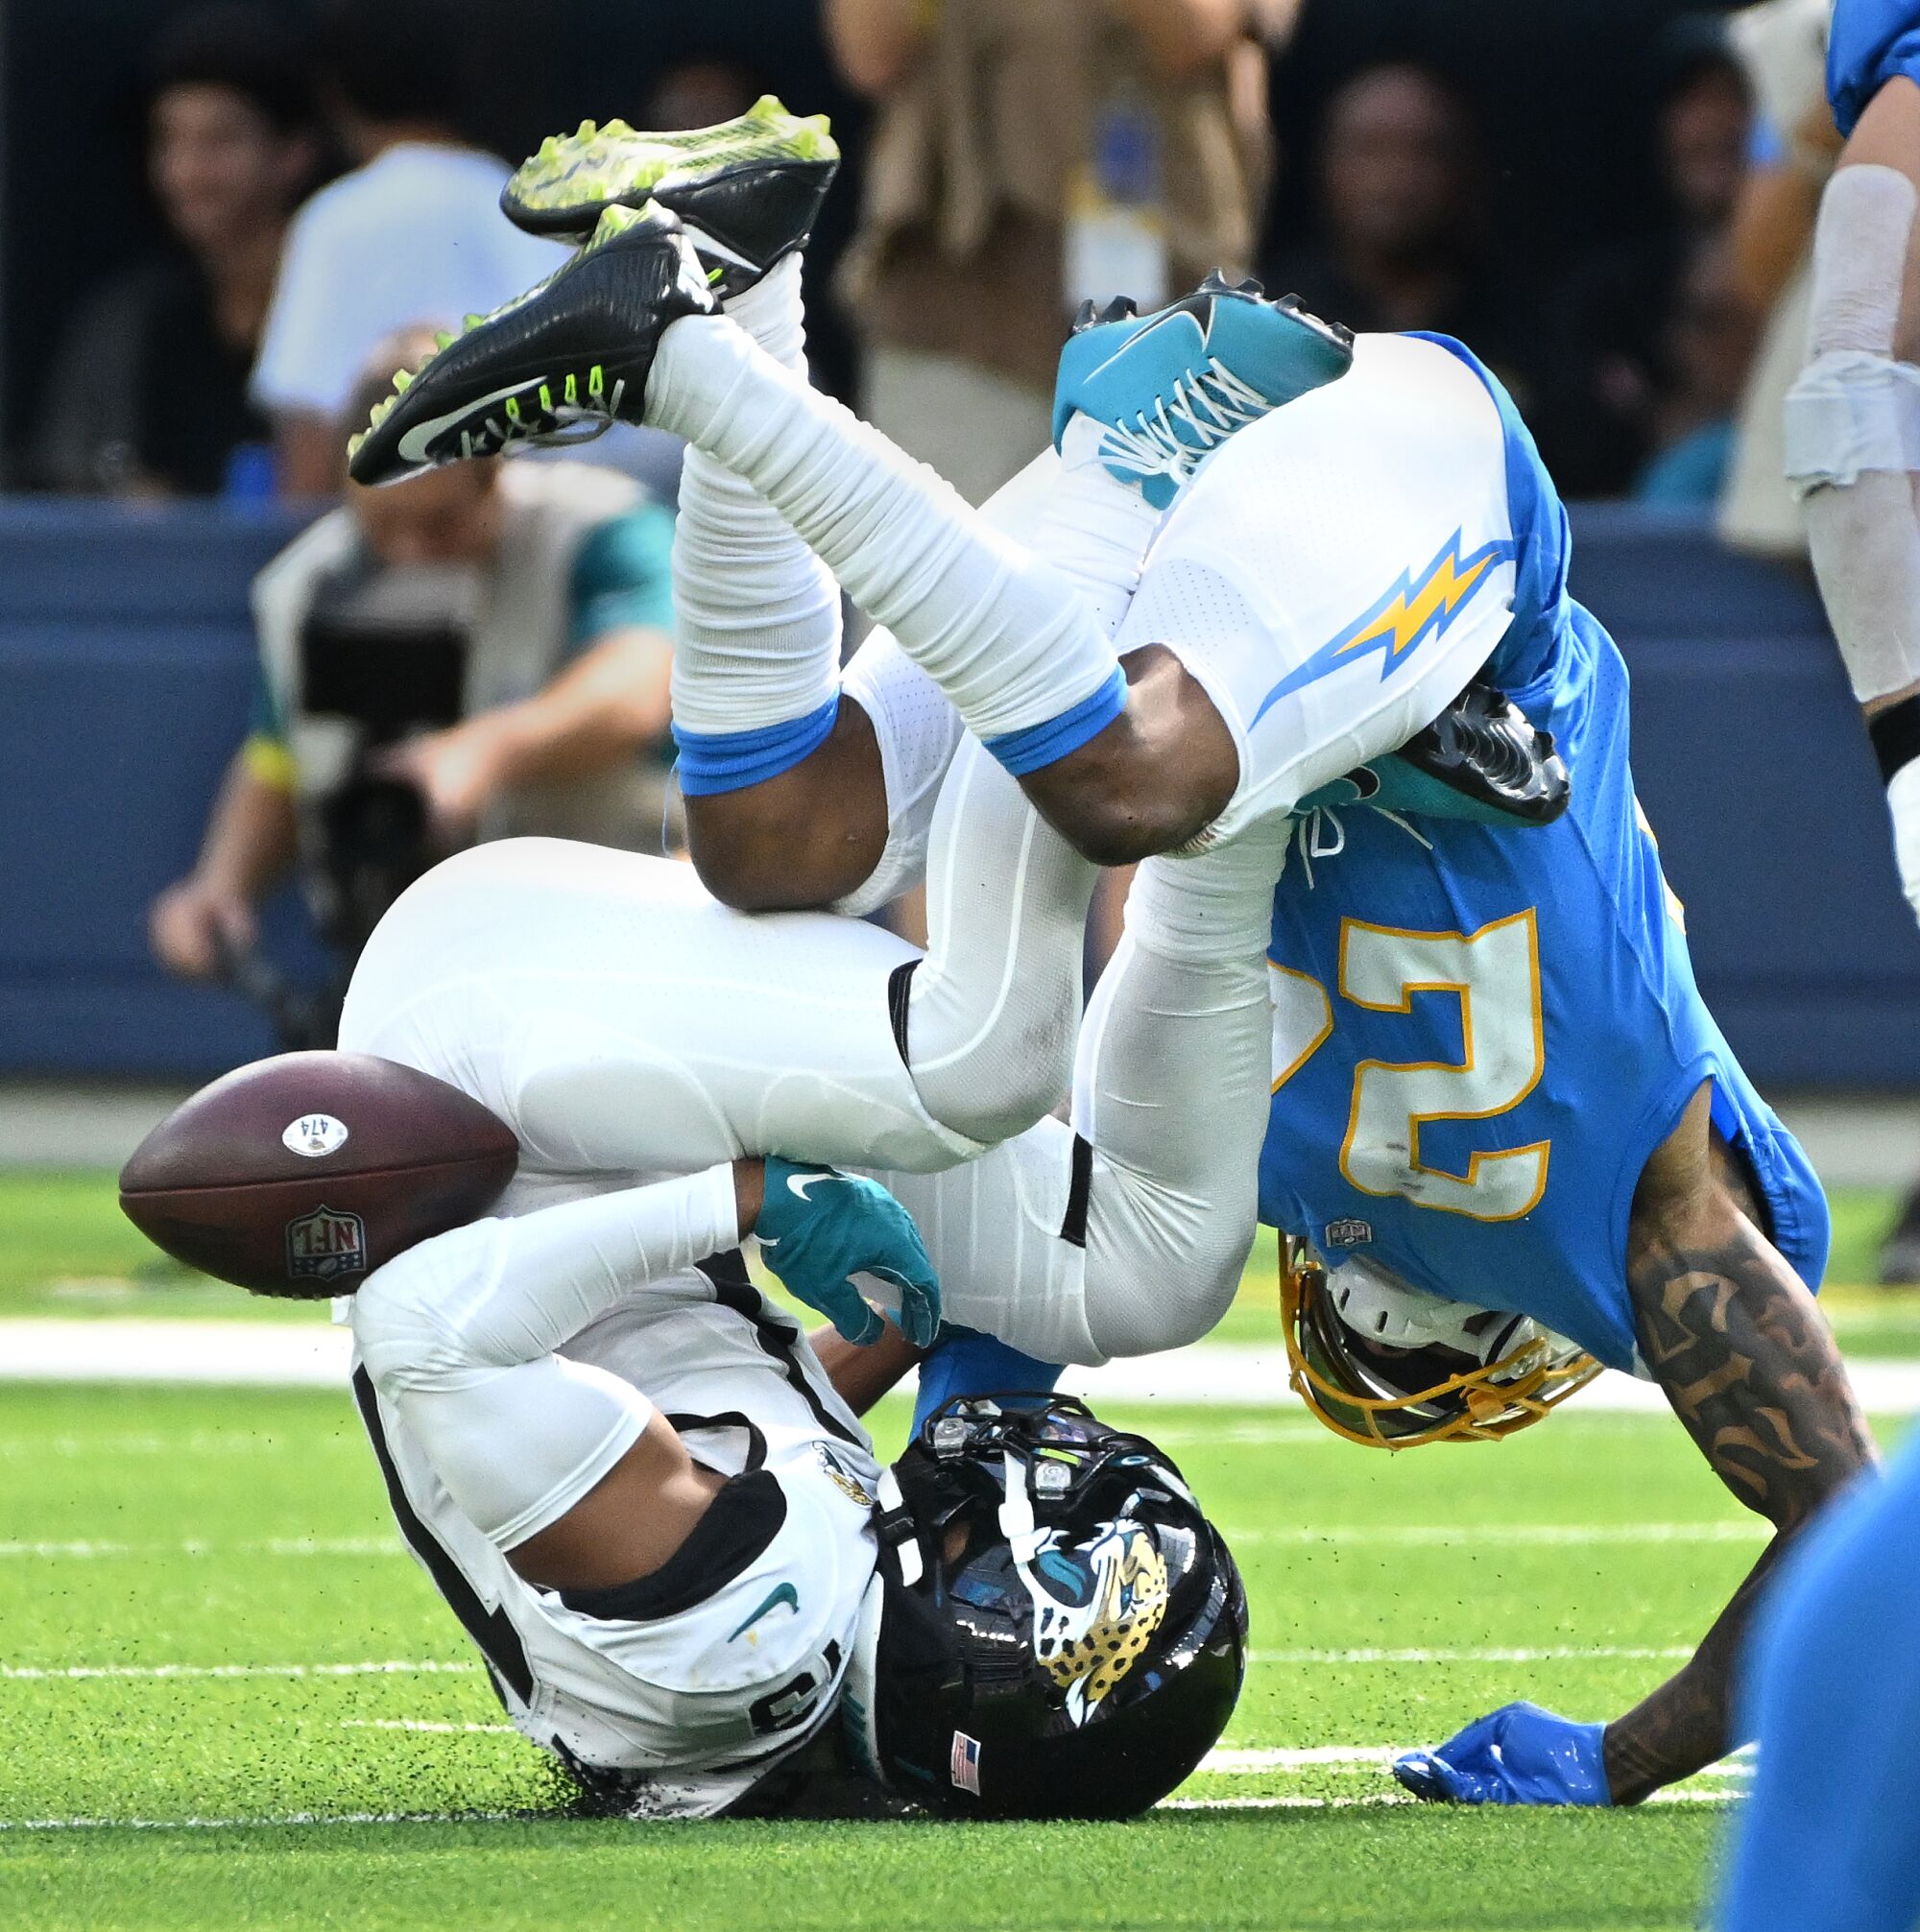 Chargers safety Nasir Adderley, top, breaks up a pass intended for Jaguars receiver Christian Kirk in the third quarter.